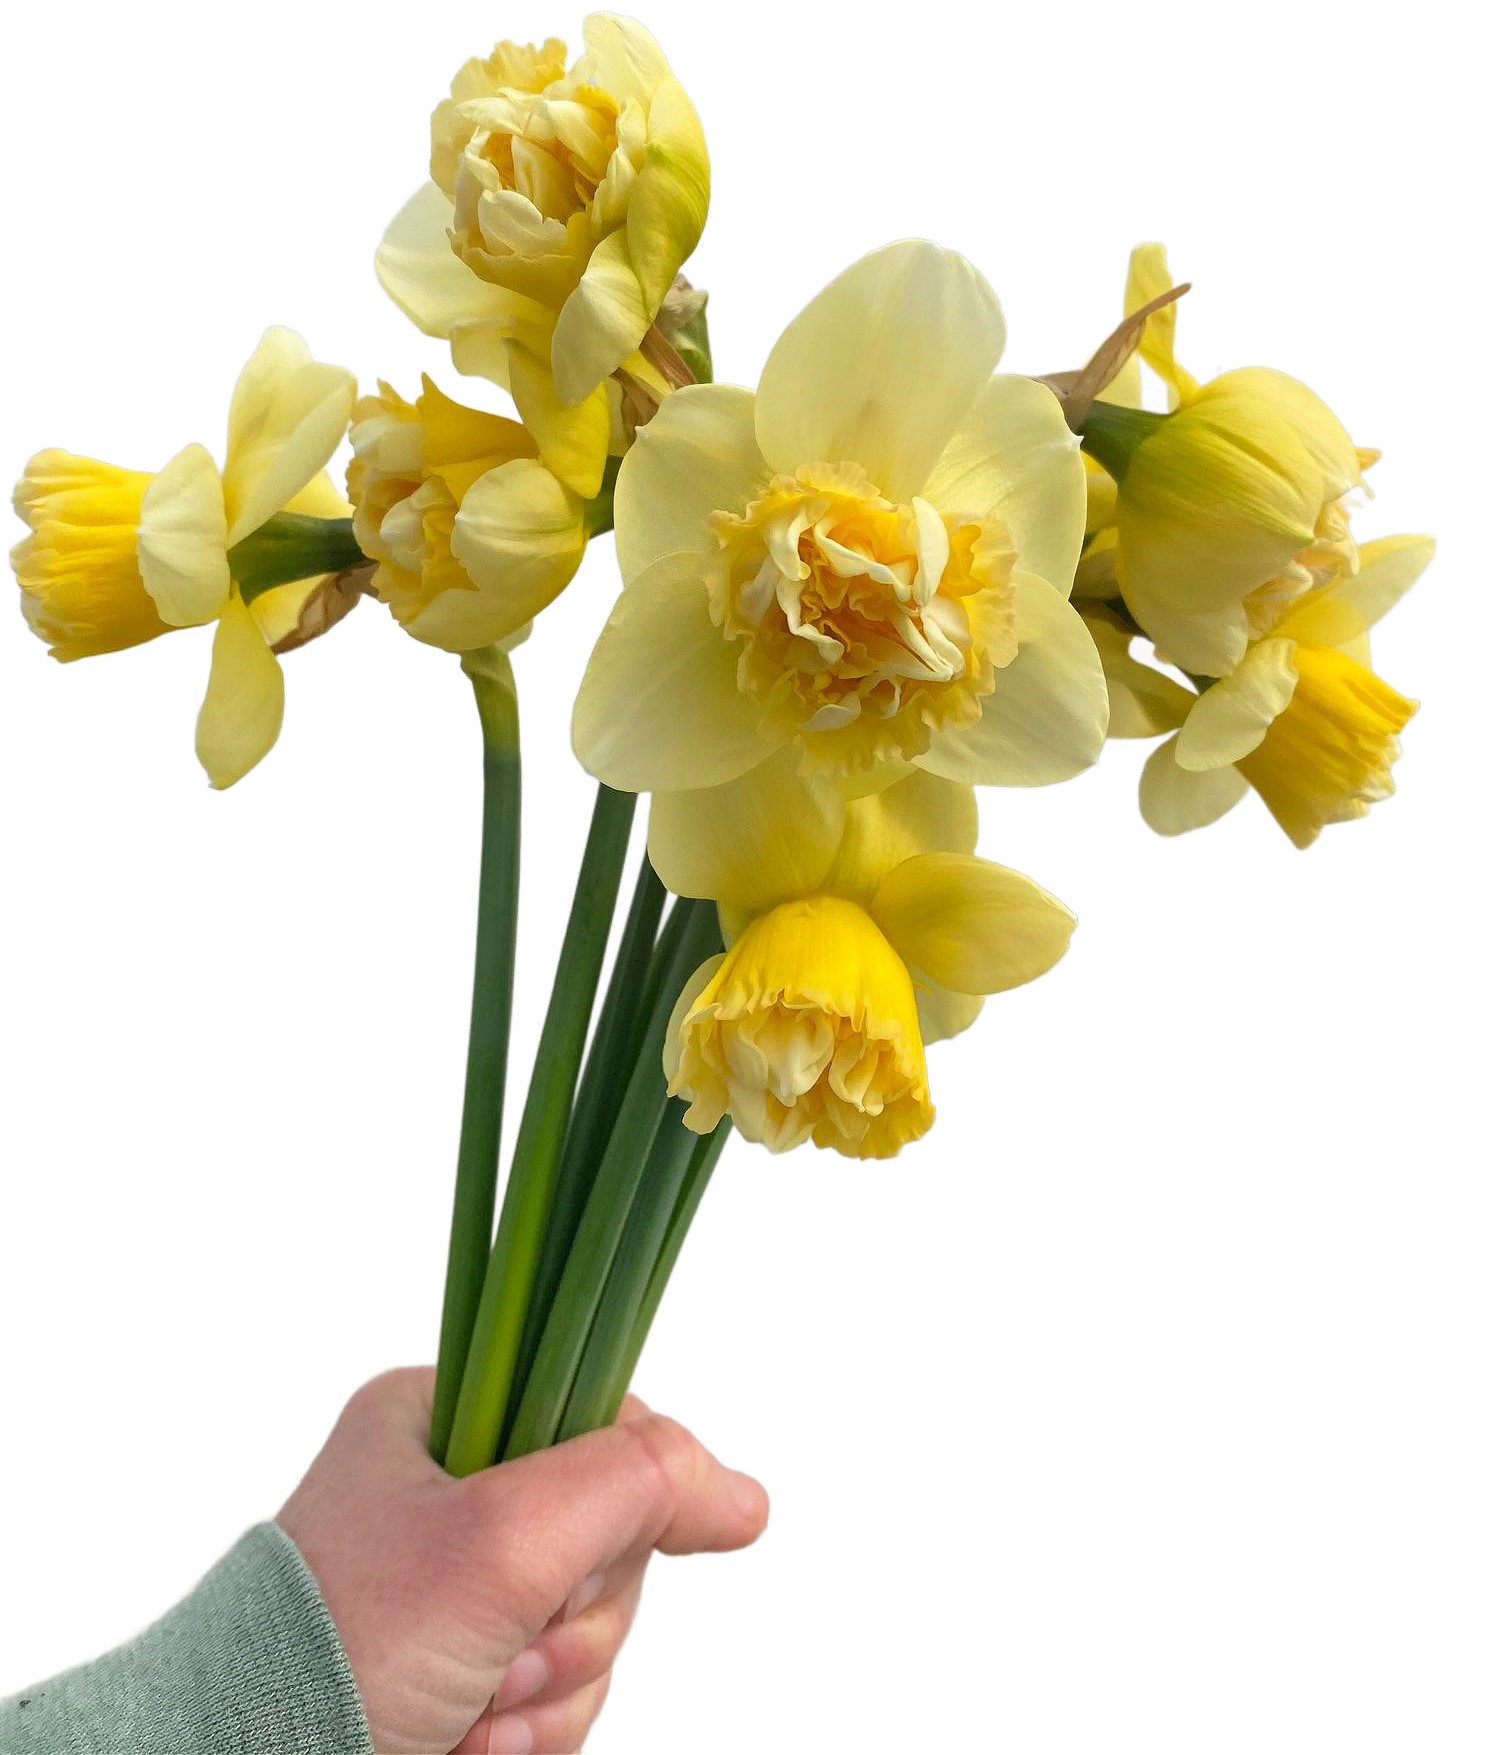 Wholesale Heirloom Narcissus Available at Philadelphia Floral Guild